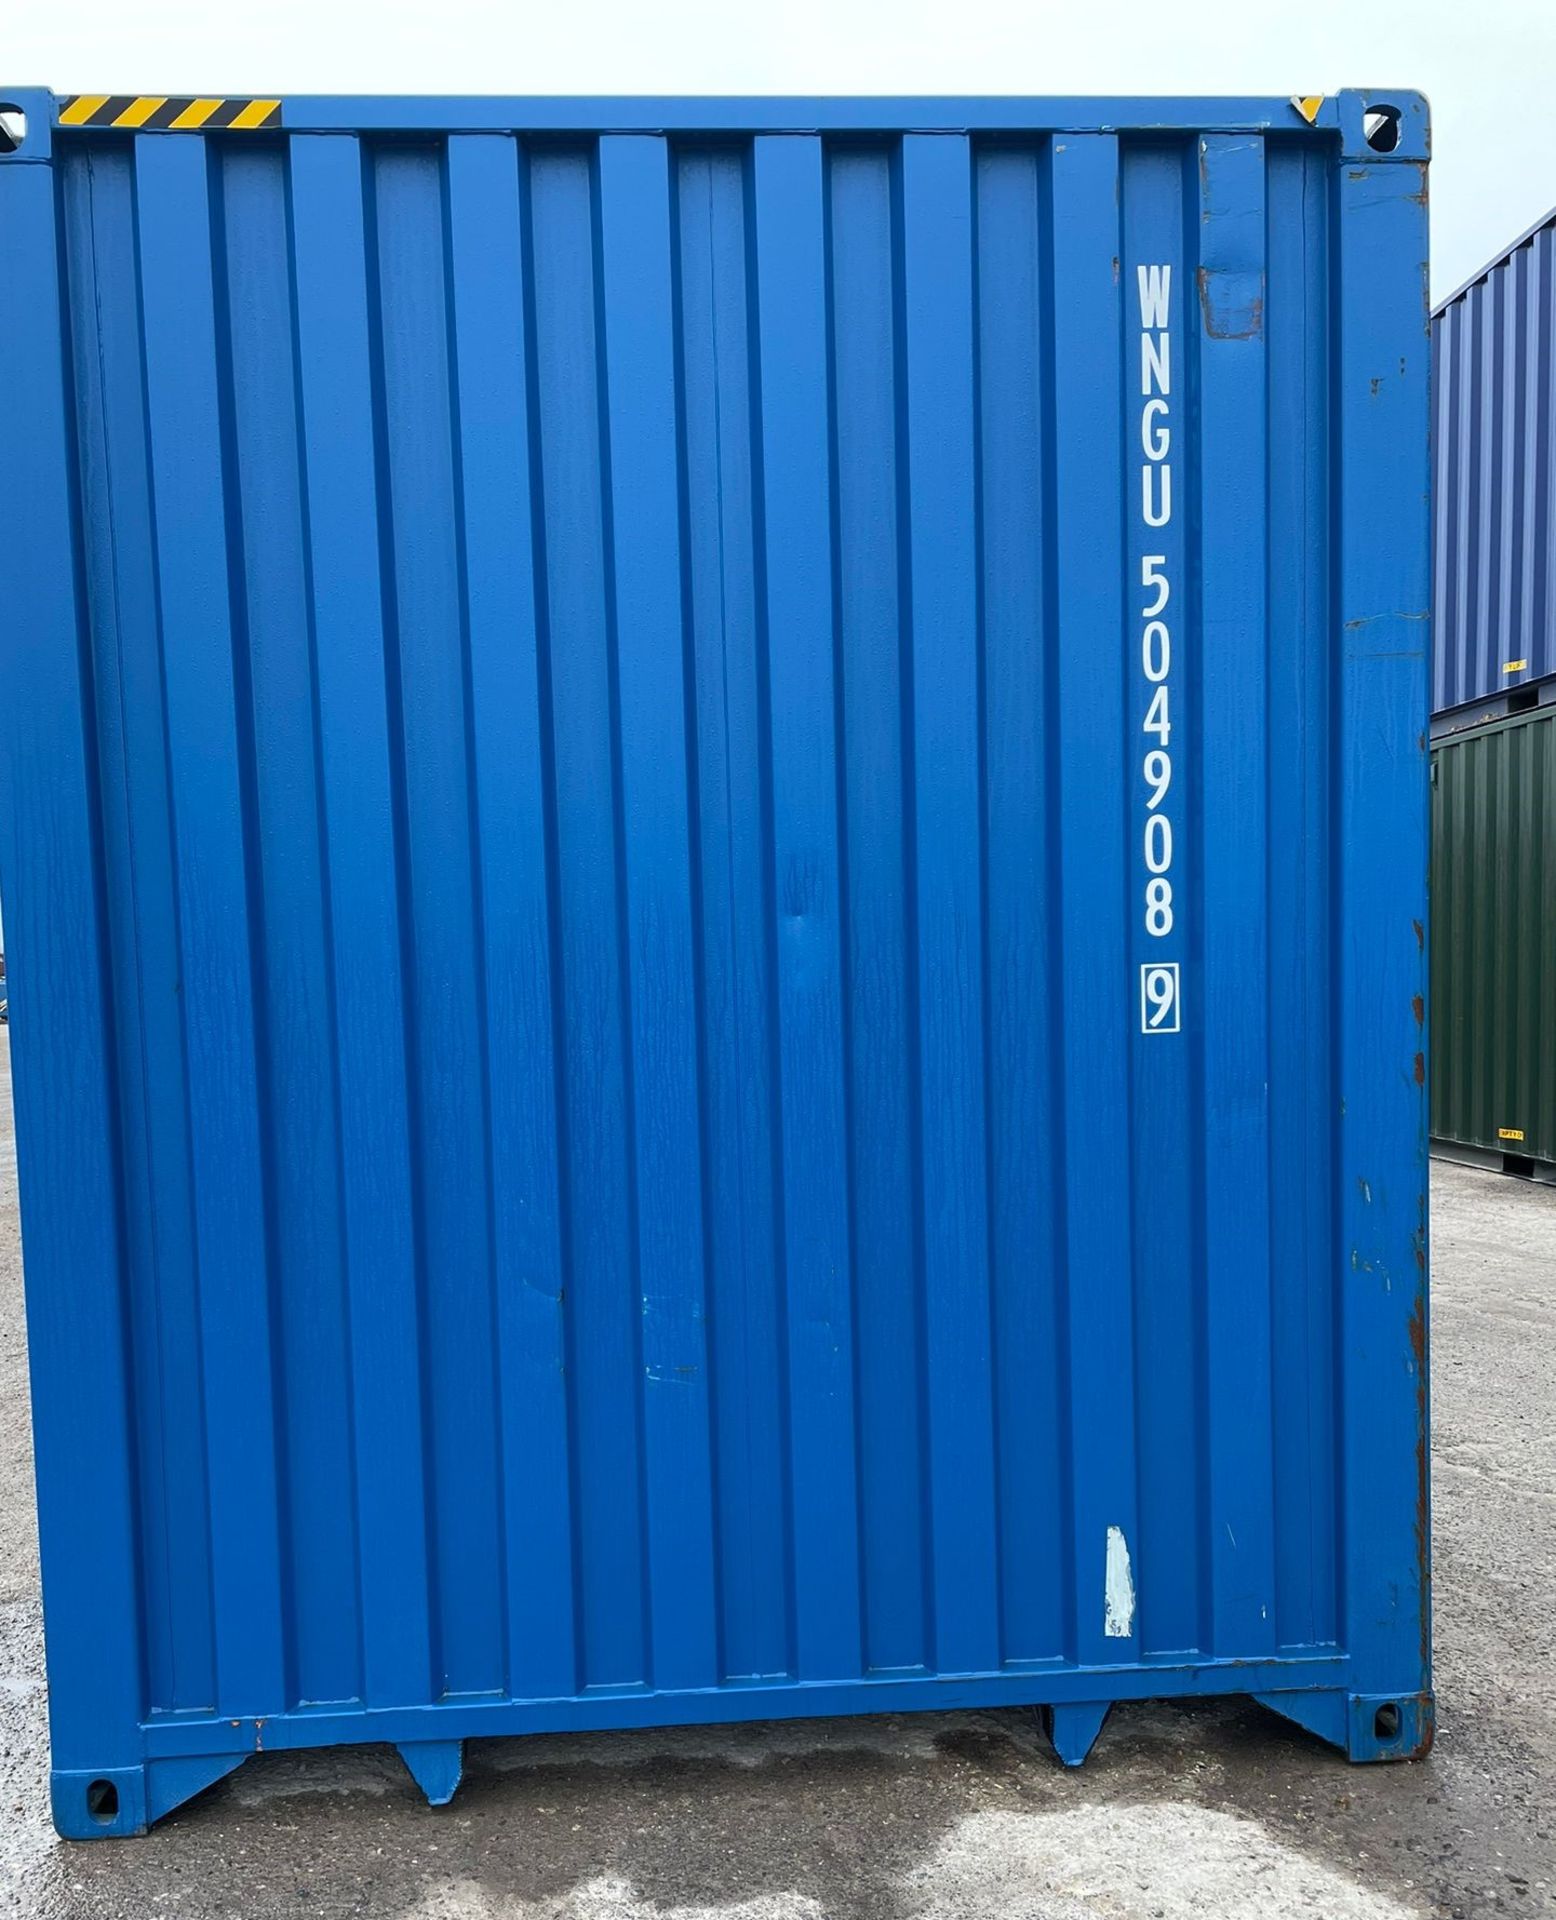 40ft HC Shipping Container - ref WNGU5049089 - NO RESERVE - Image 3 of 5